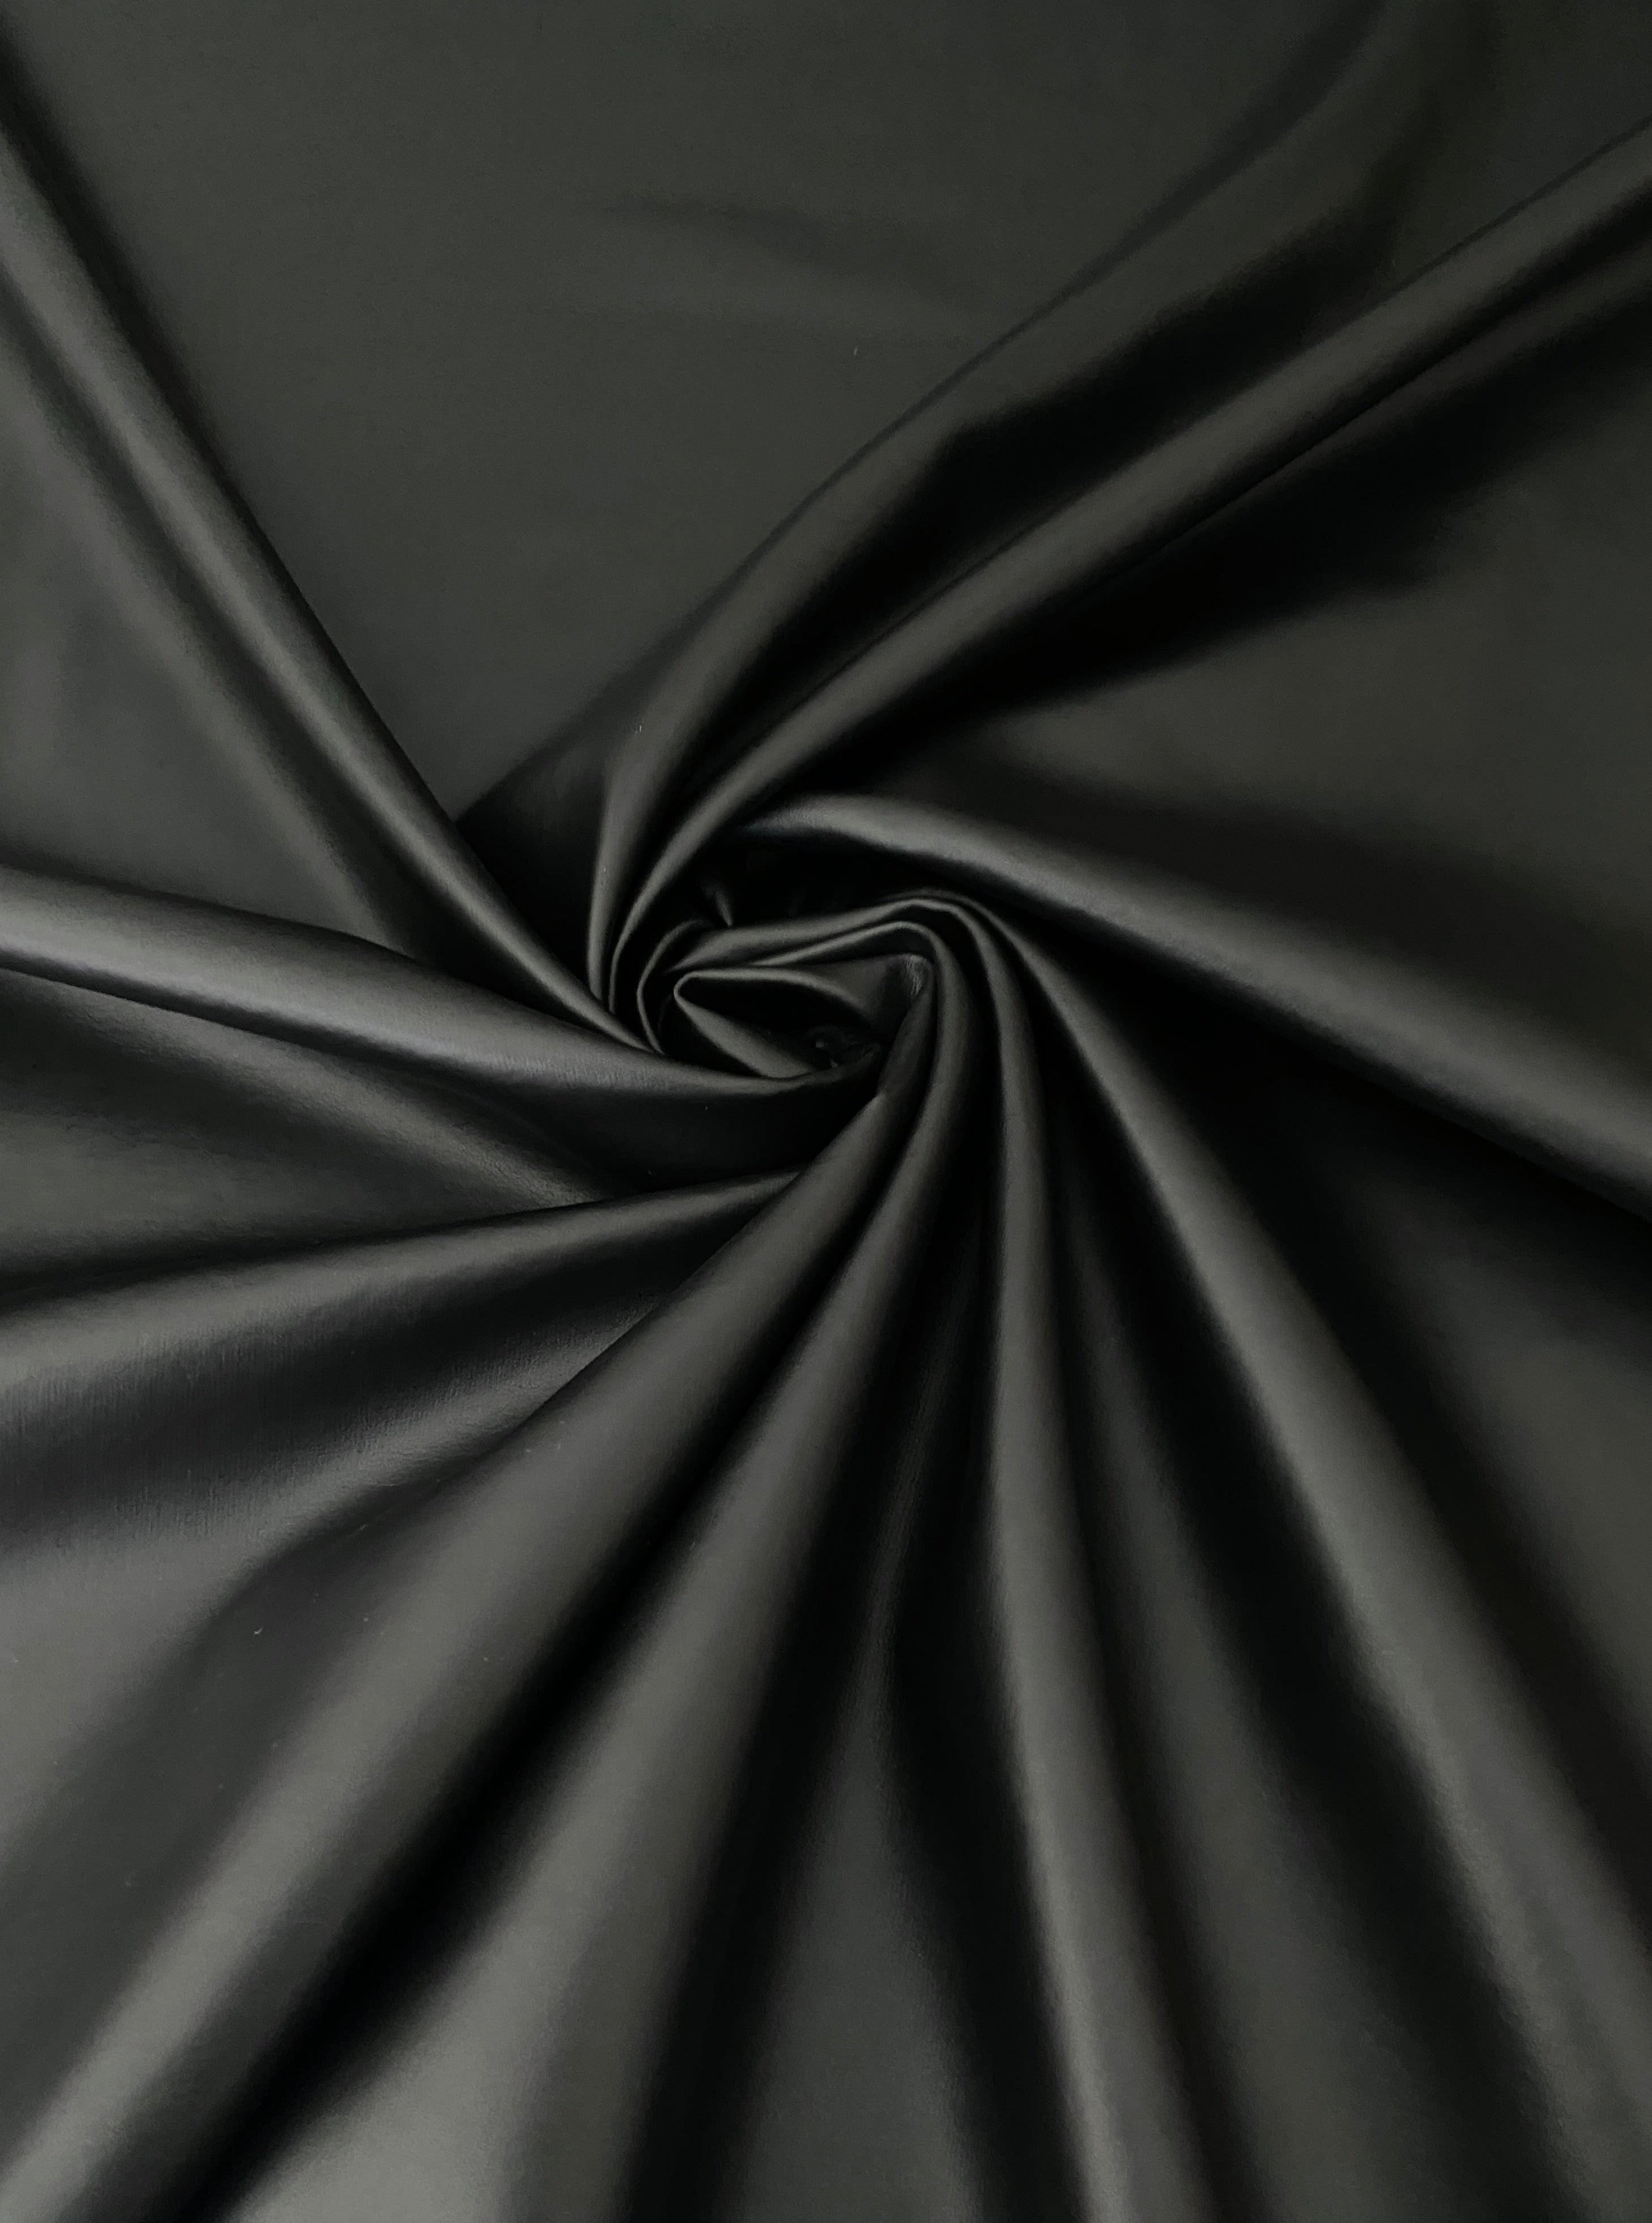 Soft and Smooth Vinyl Fabric  Apparel and Upholstery Weight Vinyl